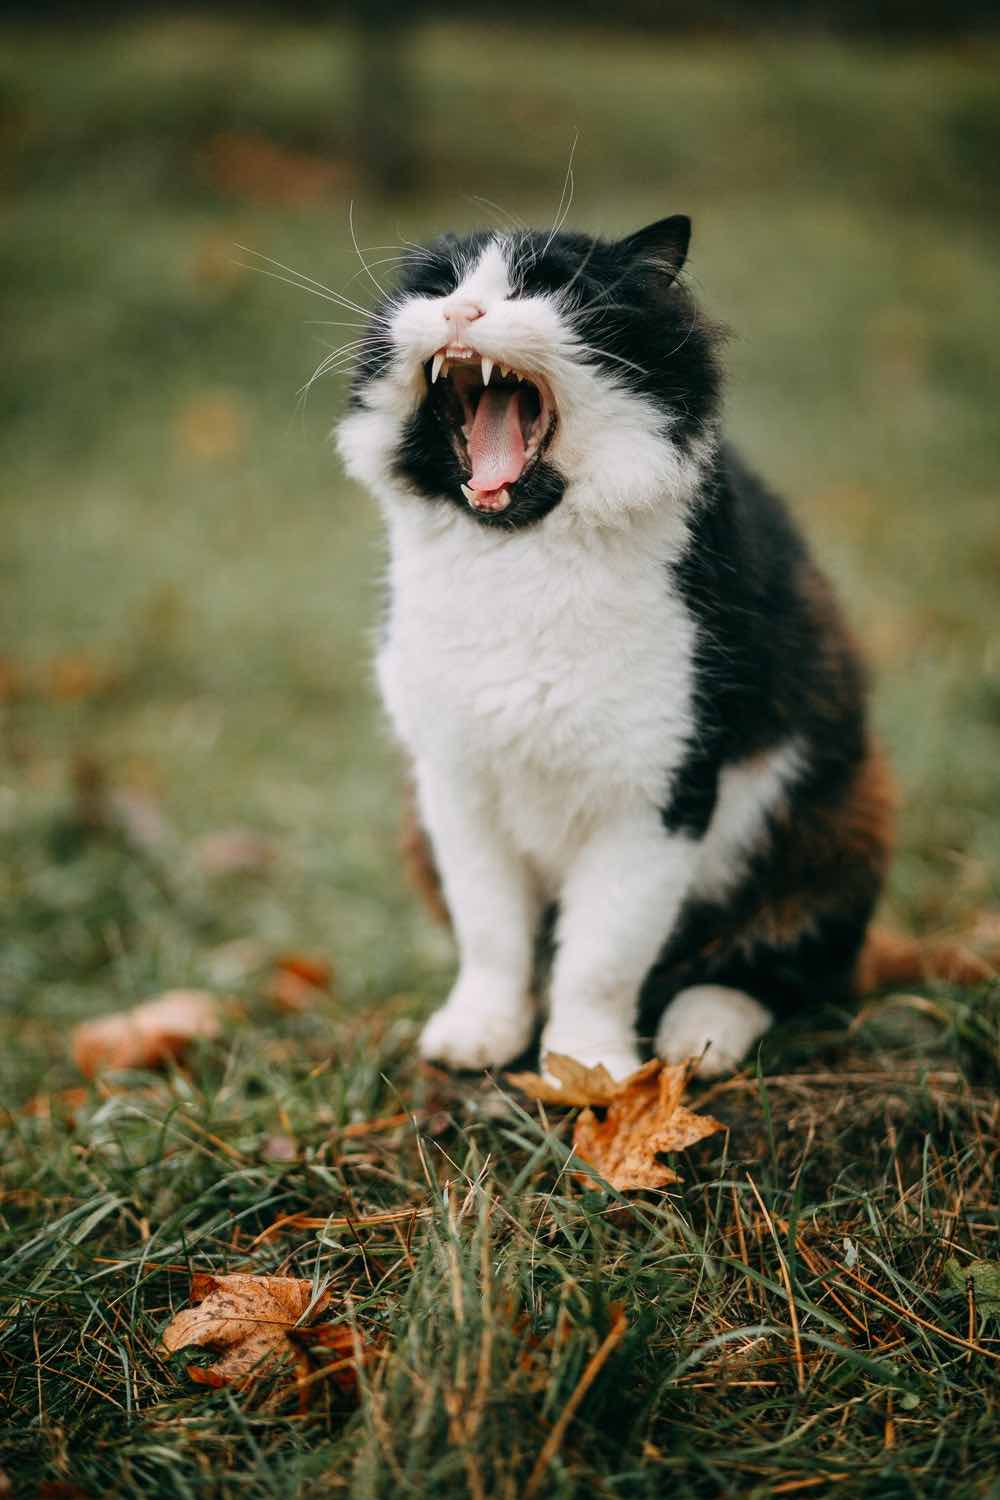 Cat Yawning On The Grass | Plants Poisonous To Cats You Should Avoid And How To Deal With Them